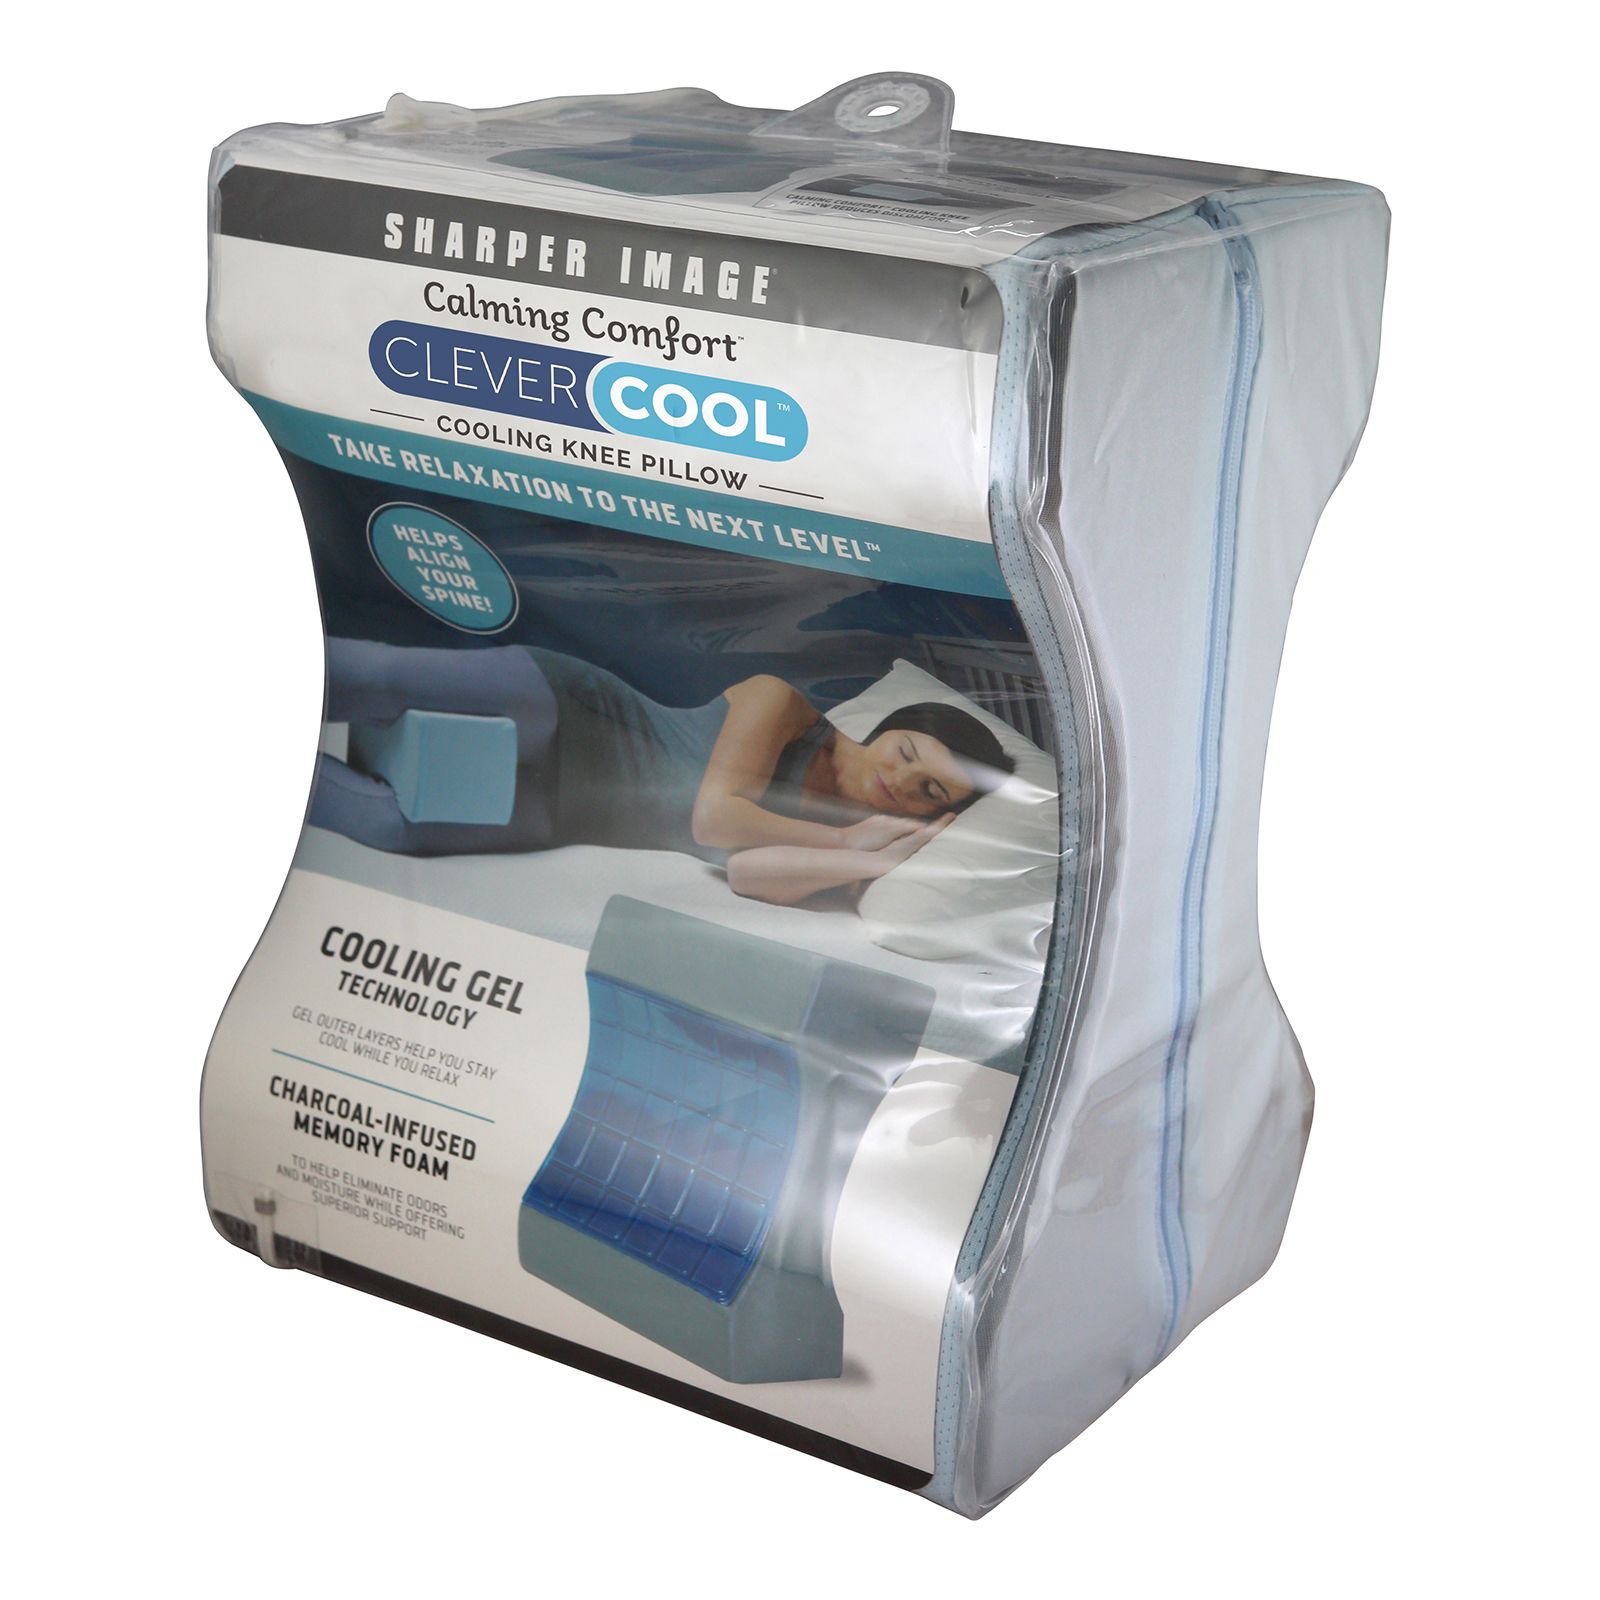 Calming Comfort Cooling Knee Pillow by Sharper Image- Charcoal